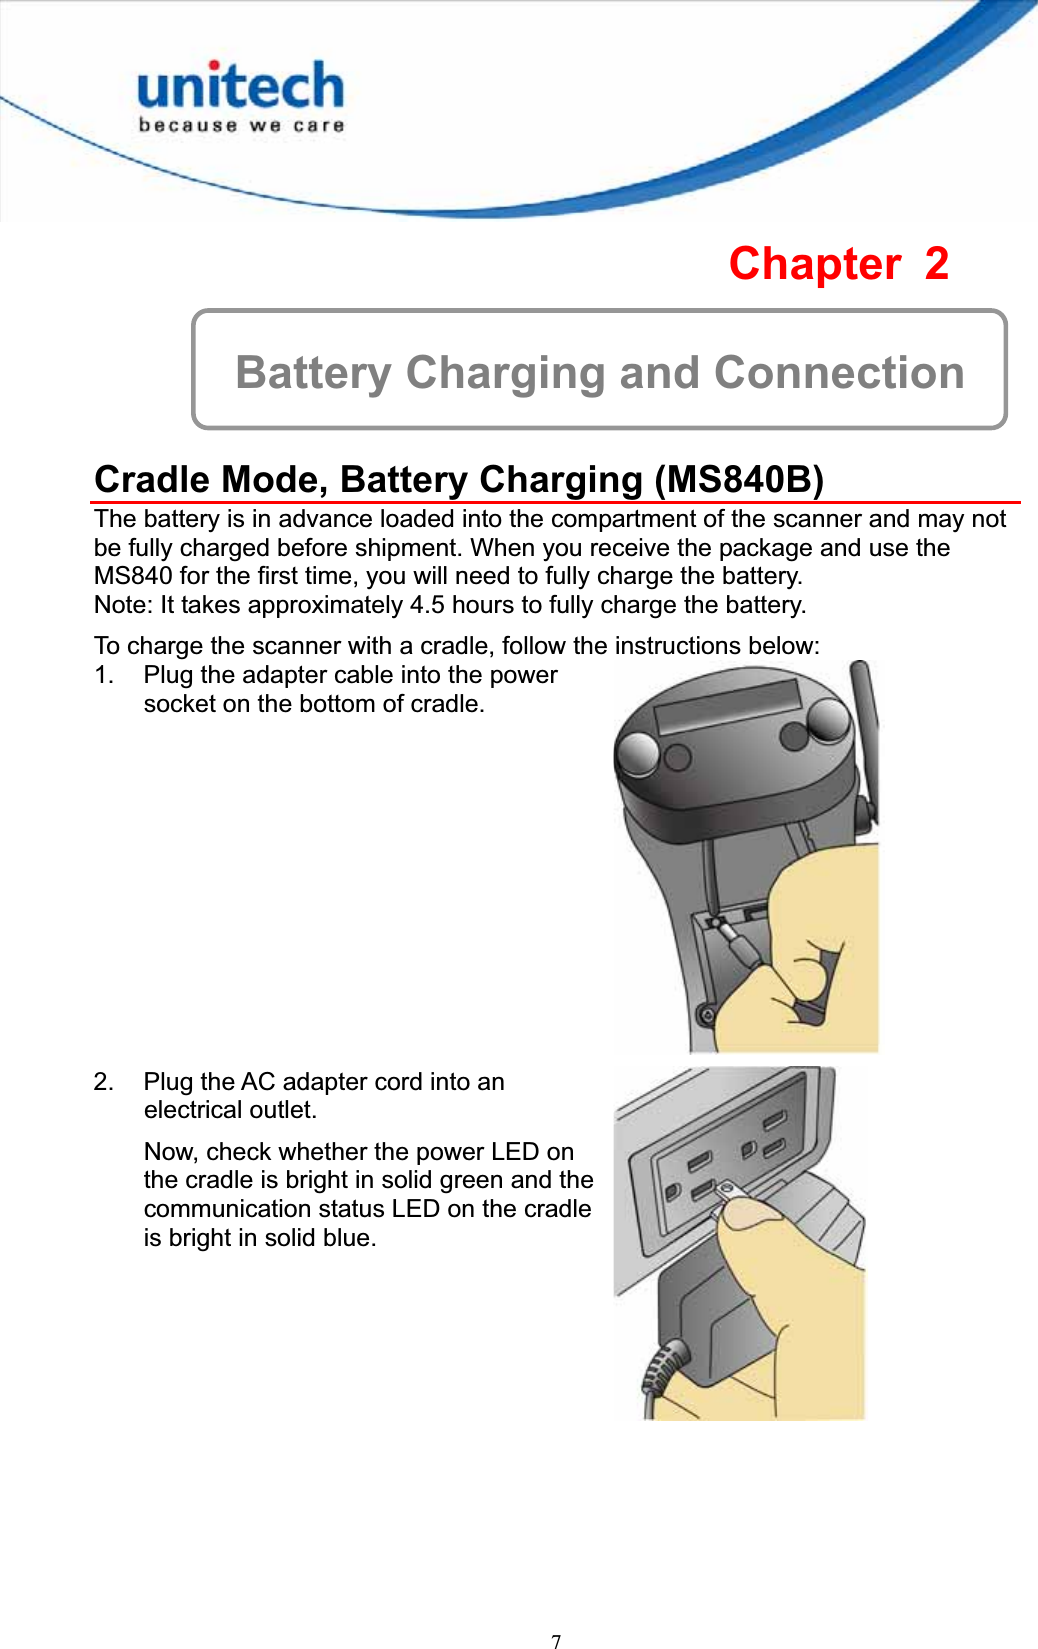 7Chapter 2 Battery Charging and Connection Cradle Mode, Battery Charging (MS840B) The battery is in advance loaded into the compartment of the scanner and may not be fully charged before shipment. When you receive the package and use the MS840 for the first time, you will need to fully charge the battery. Note: It takes approximately 4.5 hours to fully charge the battery. To charge the scanner with a cradle, follow the instructions below: 1.  Plug the adapter cable into the power socket on the bottom of cradle. 2.  Plug the AC adapter cord into an electrical outlet. Now, check whether the power LED on the cradle is bright in solid green and the communication status LED on the cradle is bright in solid blue. 